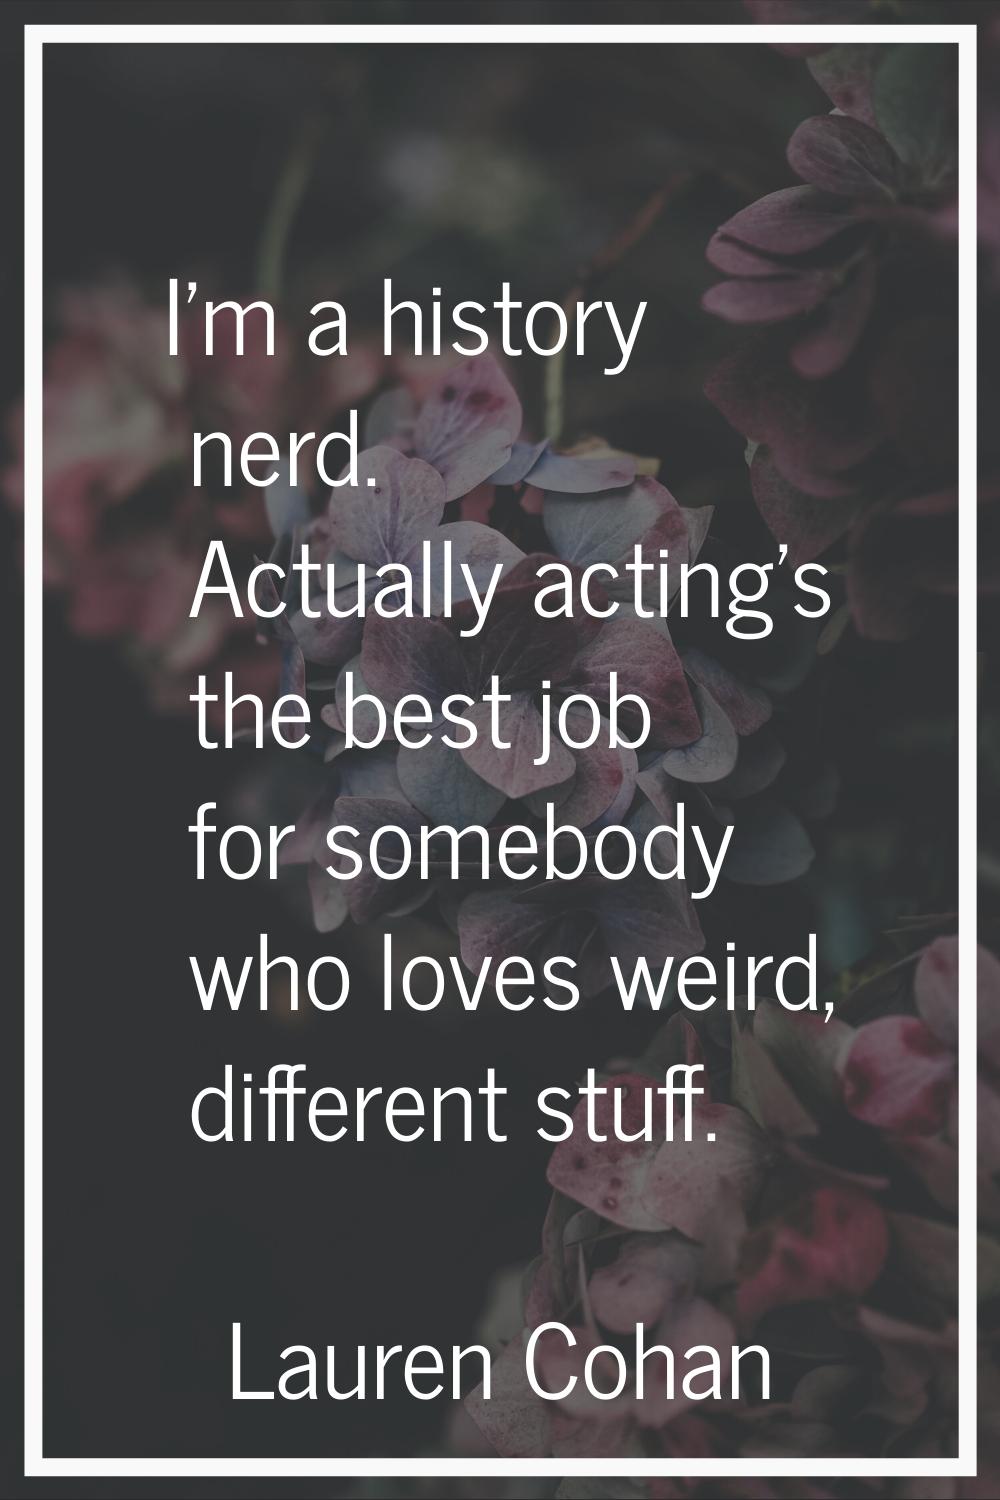 I'm a history nerd. Actually acting's the best job for somebody who loves weird, different stuff.